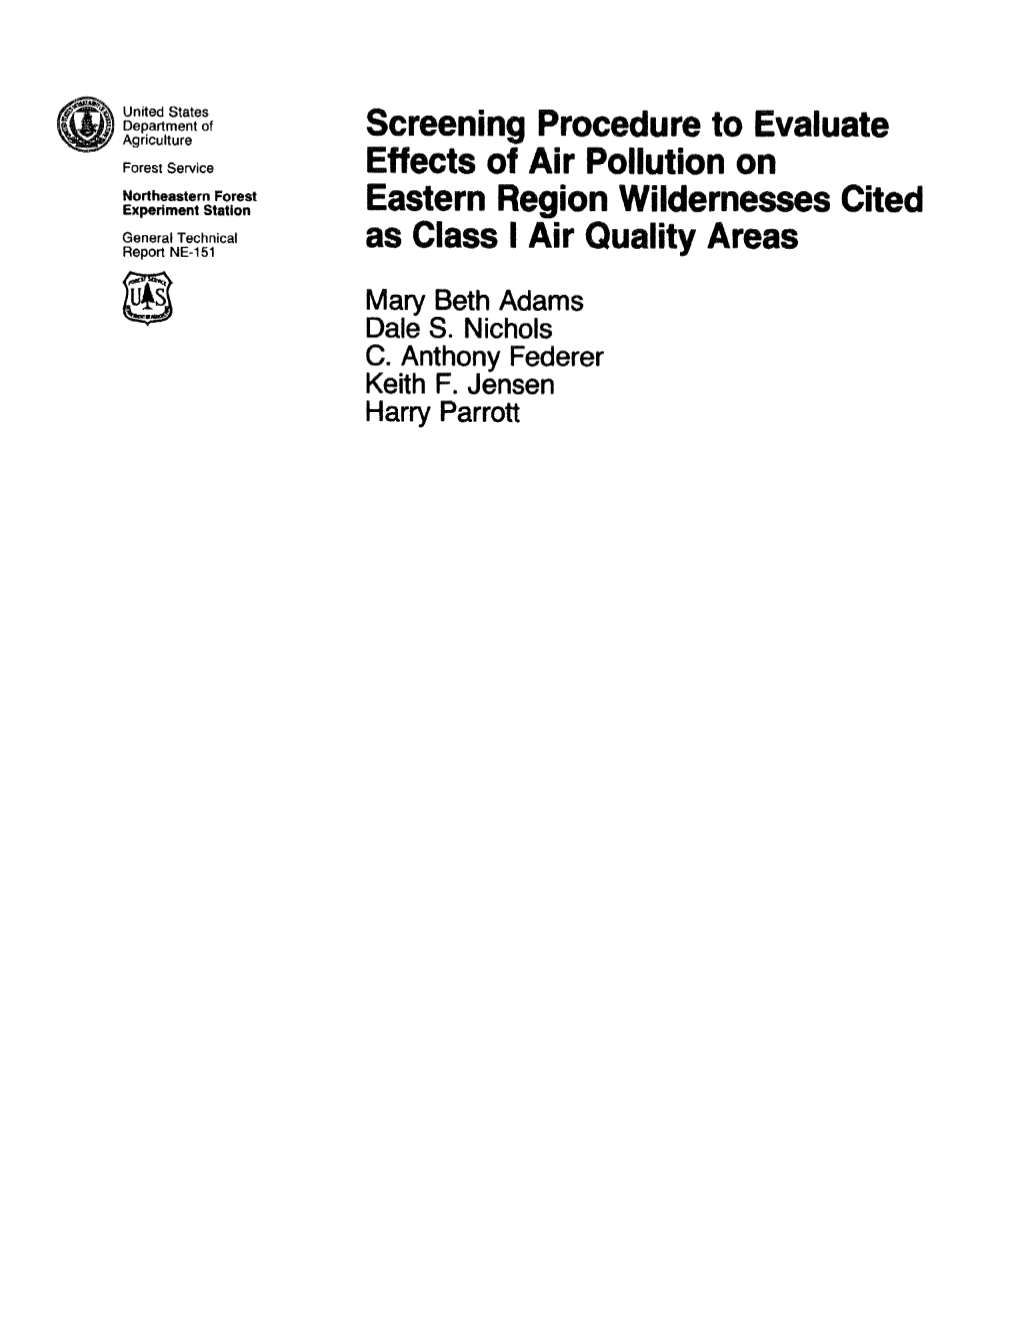 Screening Procedure to Evaluate Effects of Air Pollution on Eastern Region Wildernesses Cited As Class I Air Quality Areas